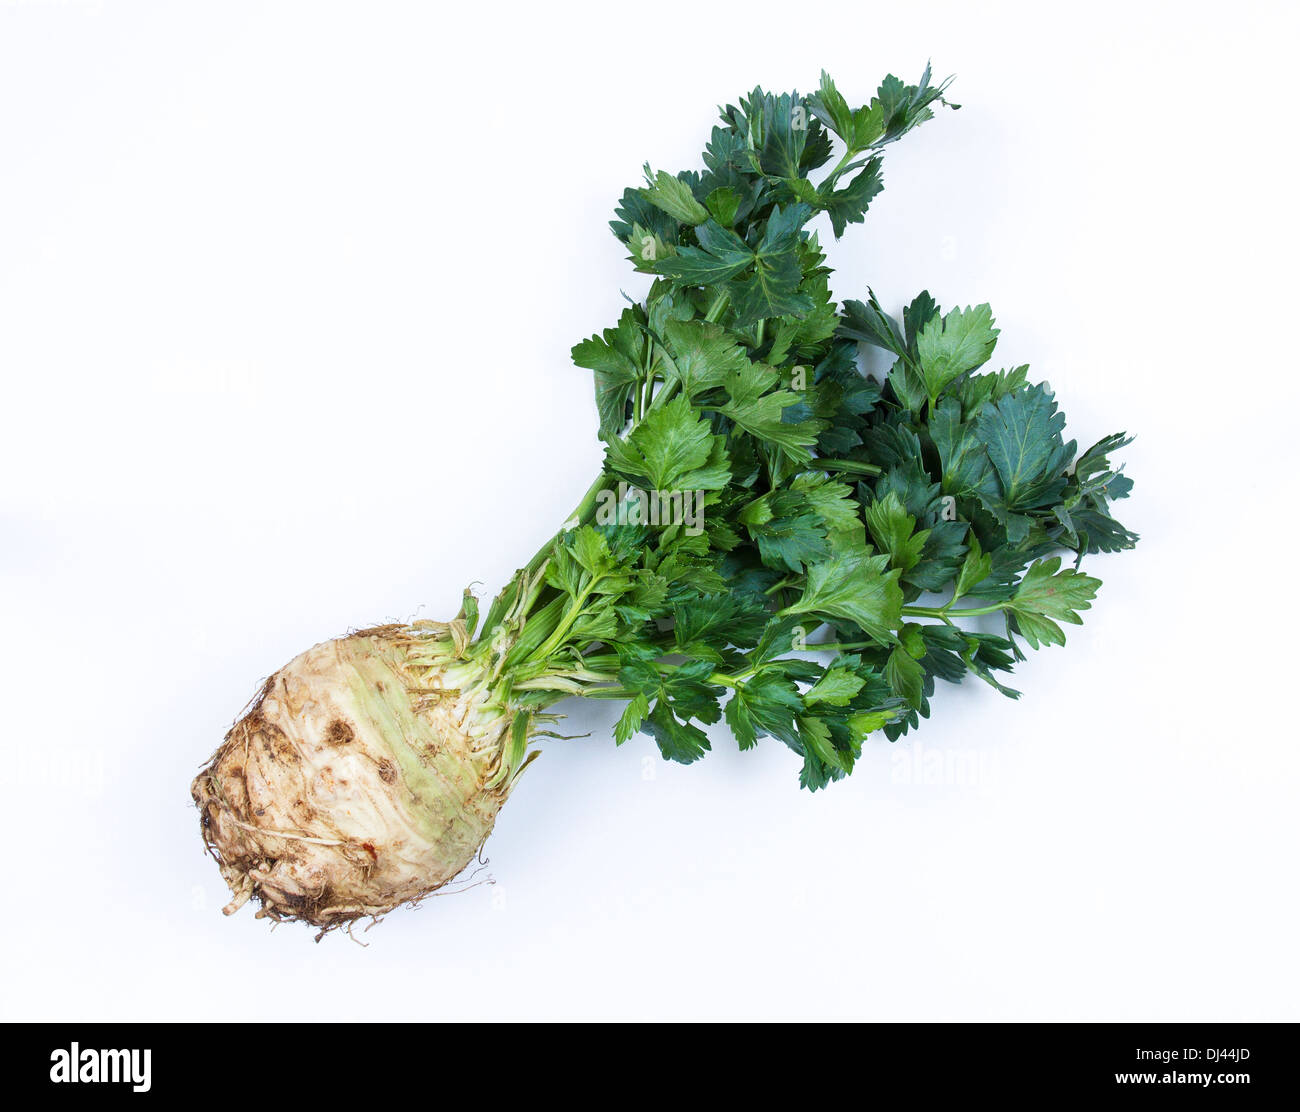 Celeriac with leaves on a white background. Stock Photo